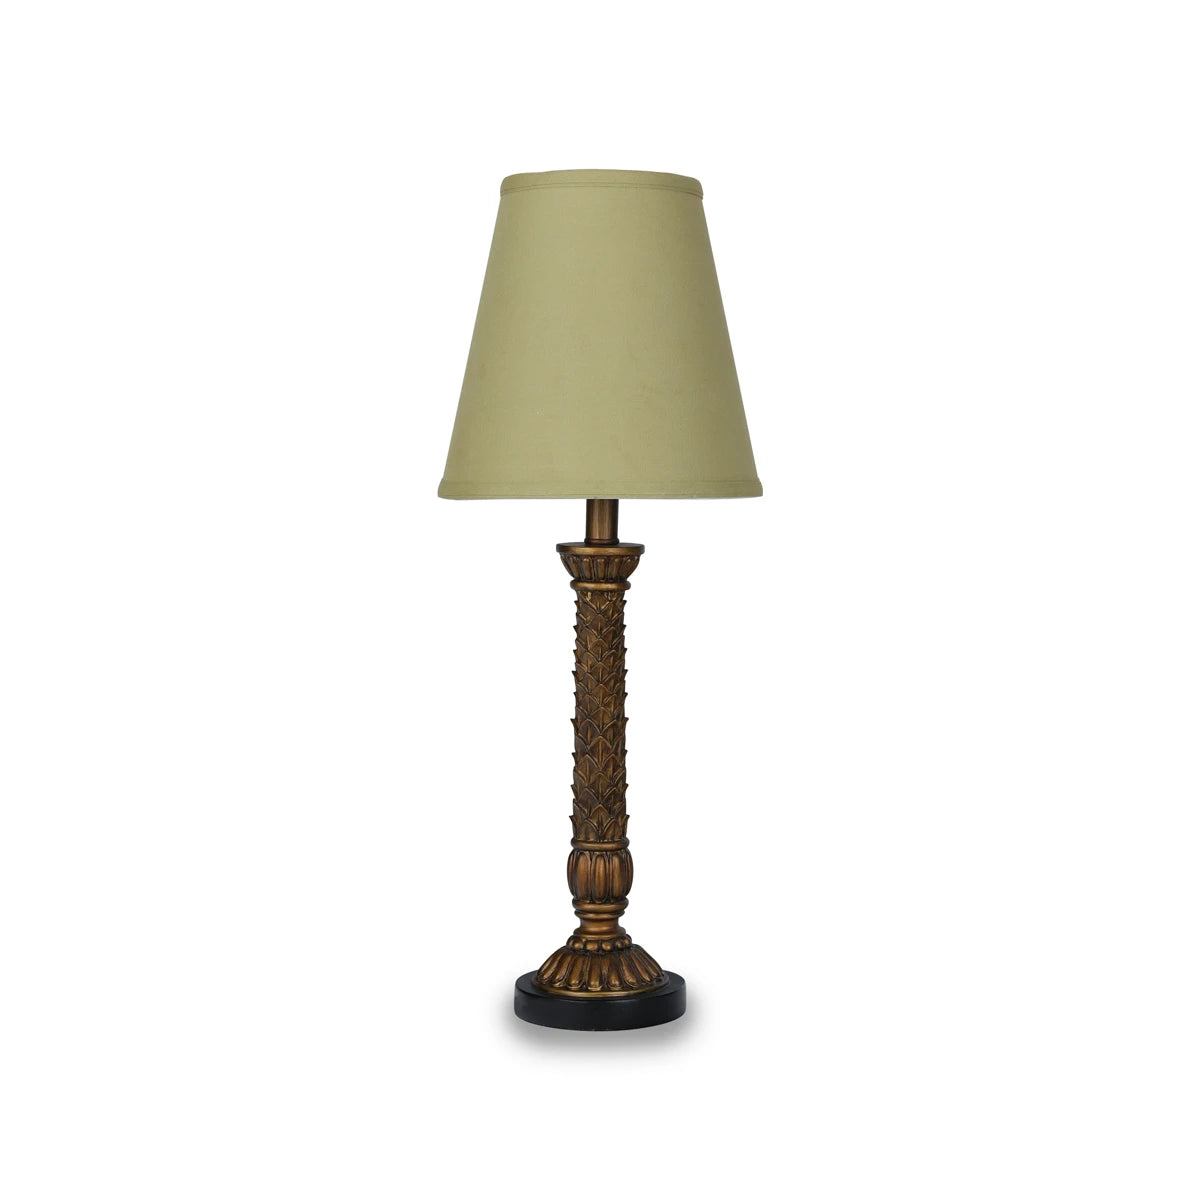 Vintage Brass Pillared Table Lamps With Seamless Floral Sculptures